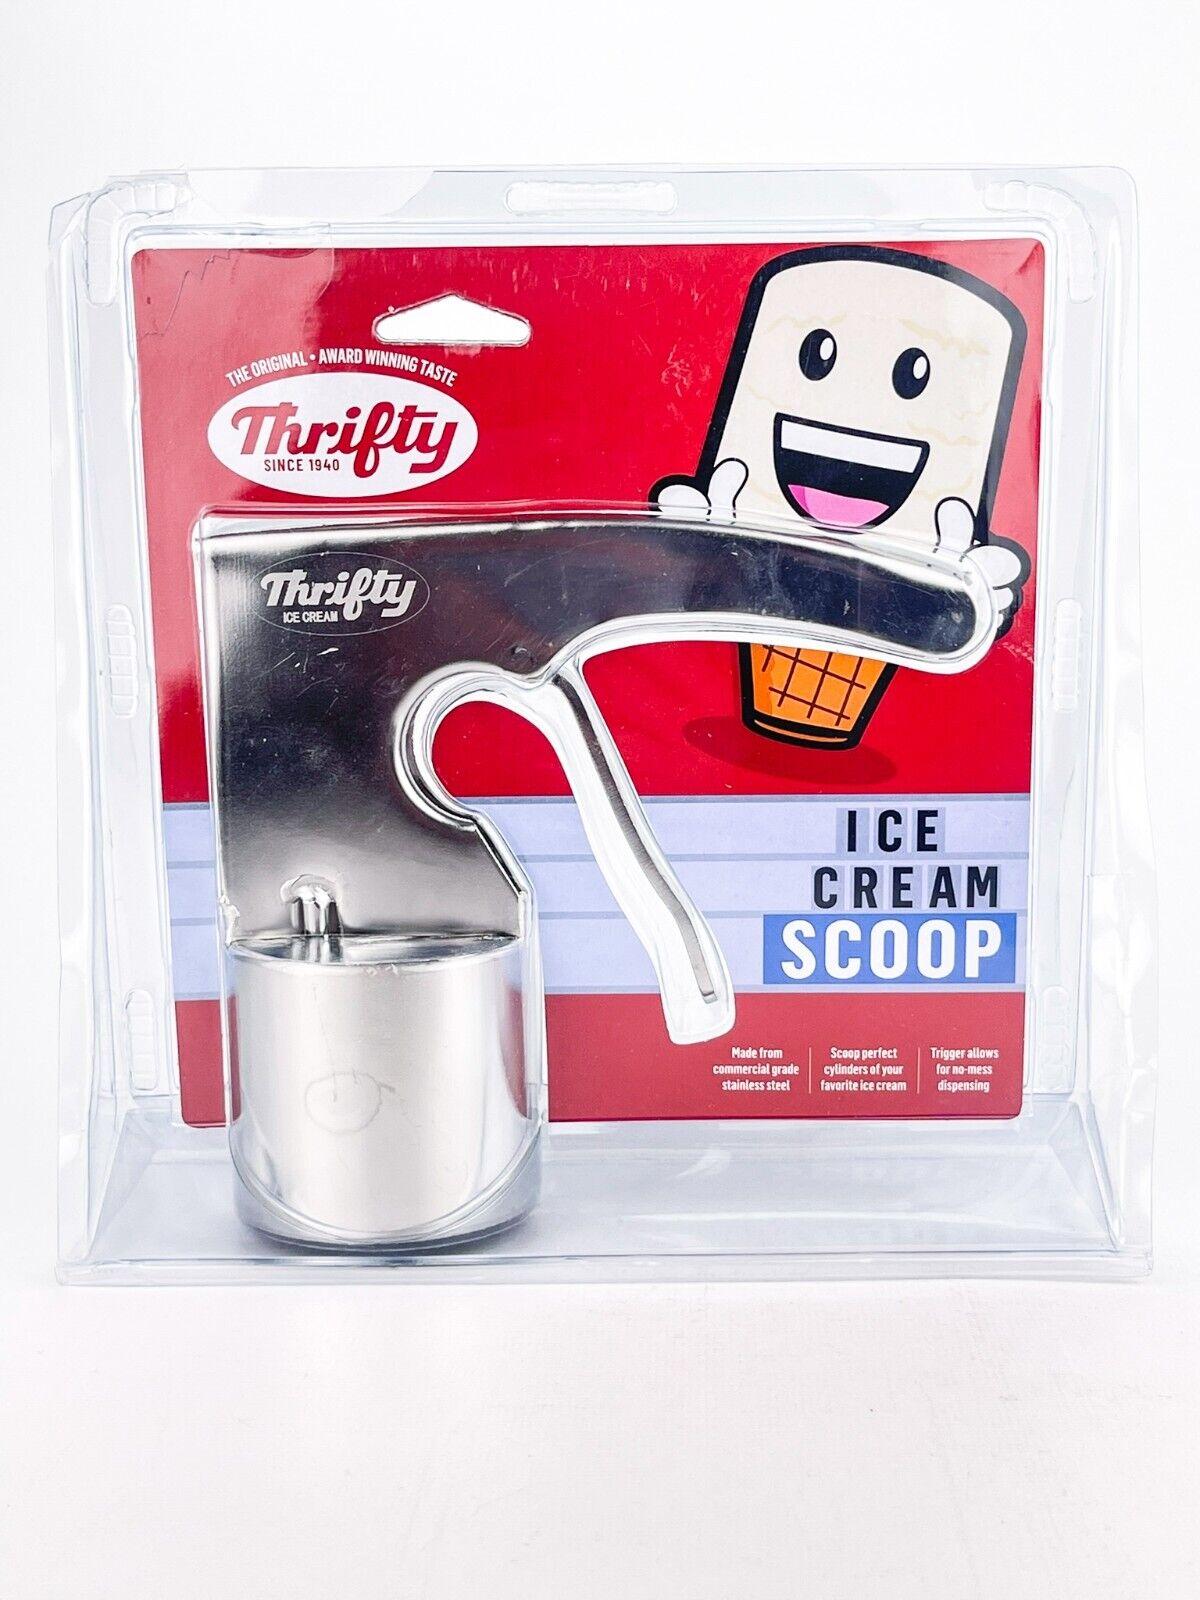 Thrifty Old Time Ice Cream Scooper Rite Aid Original Stainless Steel Scoop